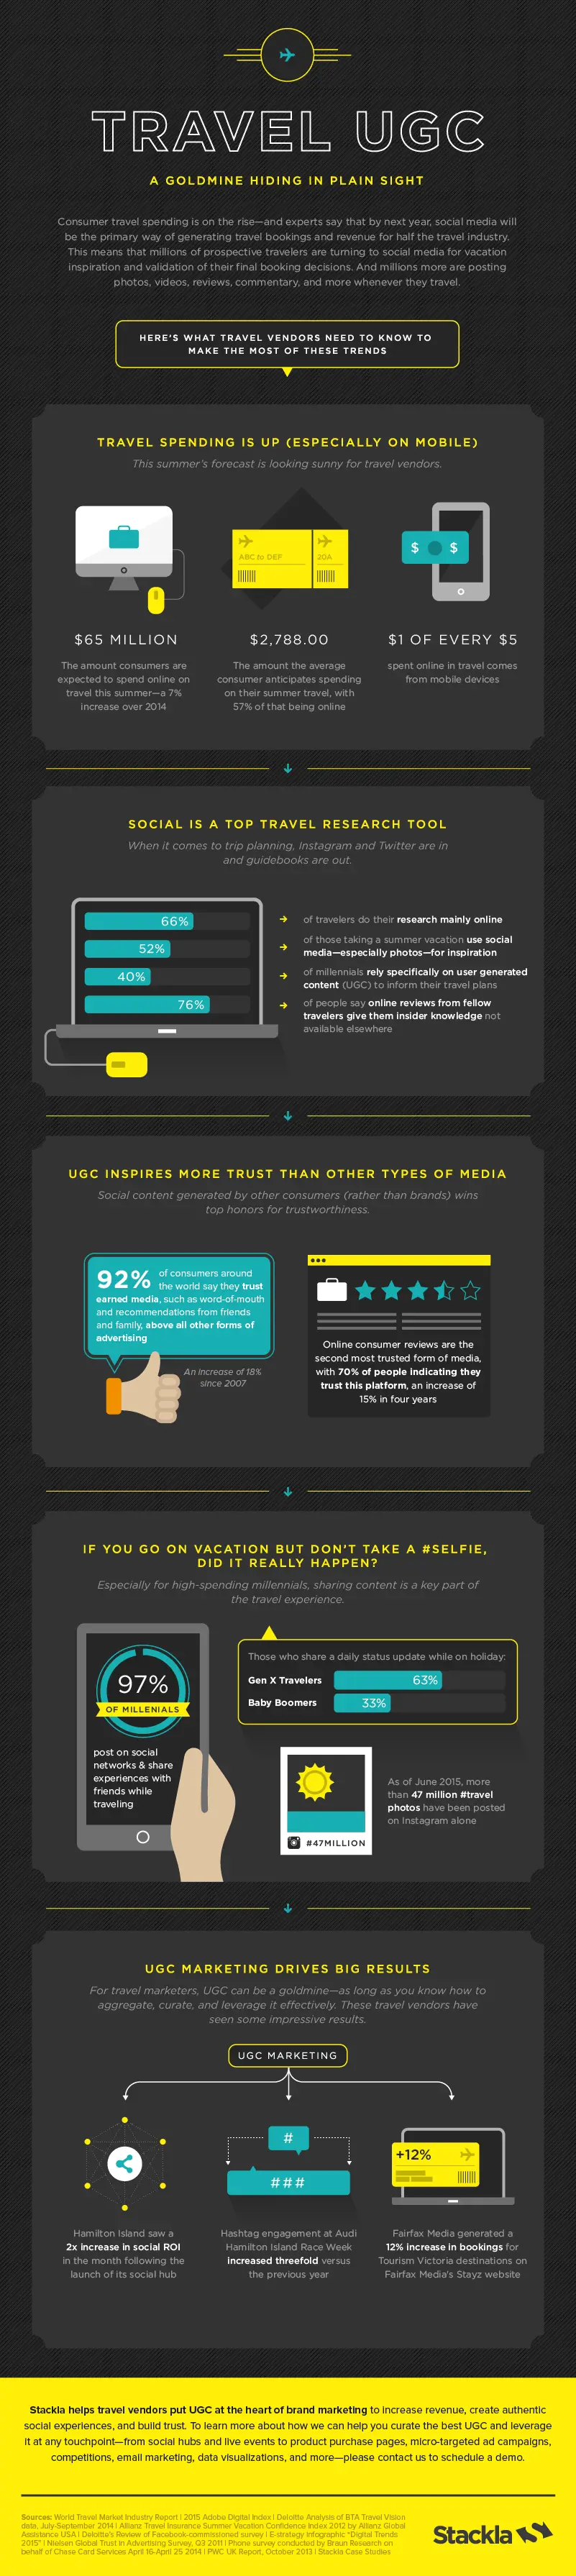 travel-user-generated-content-and-why-it-matters-to-brands-infographic